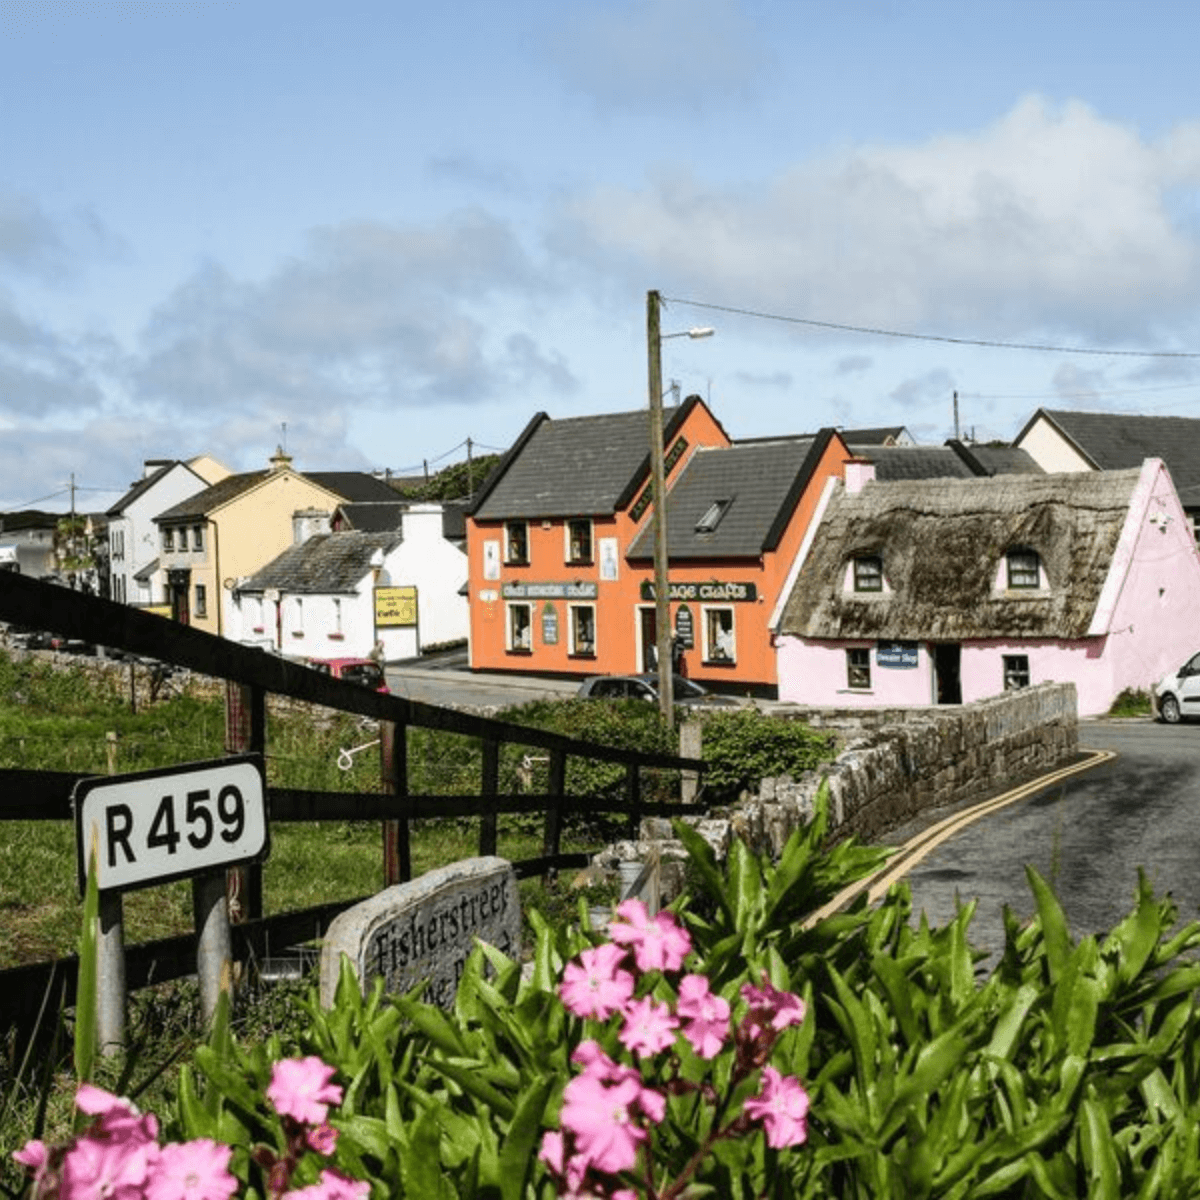 cottages on the side of the road in the village of doolin